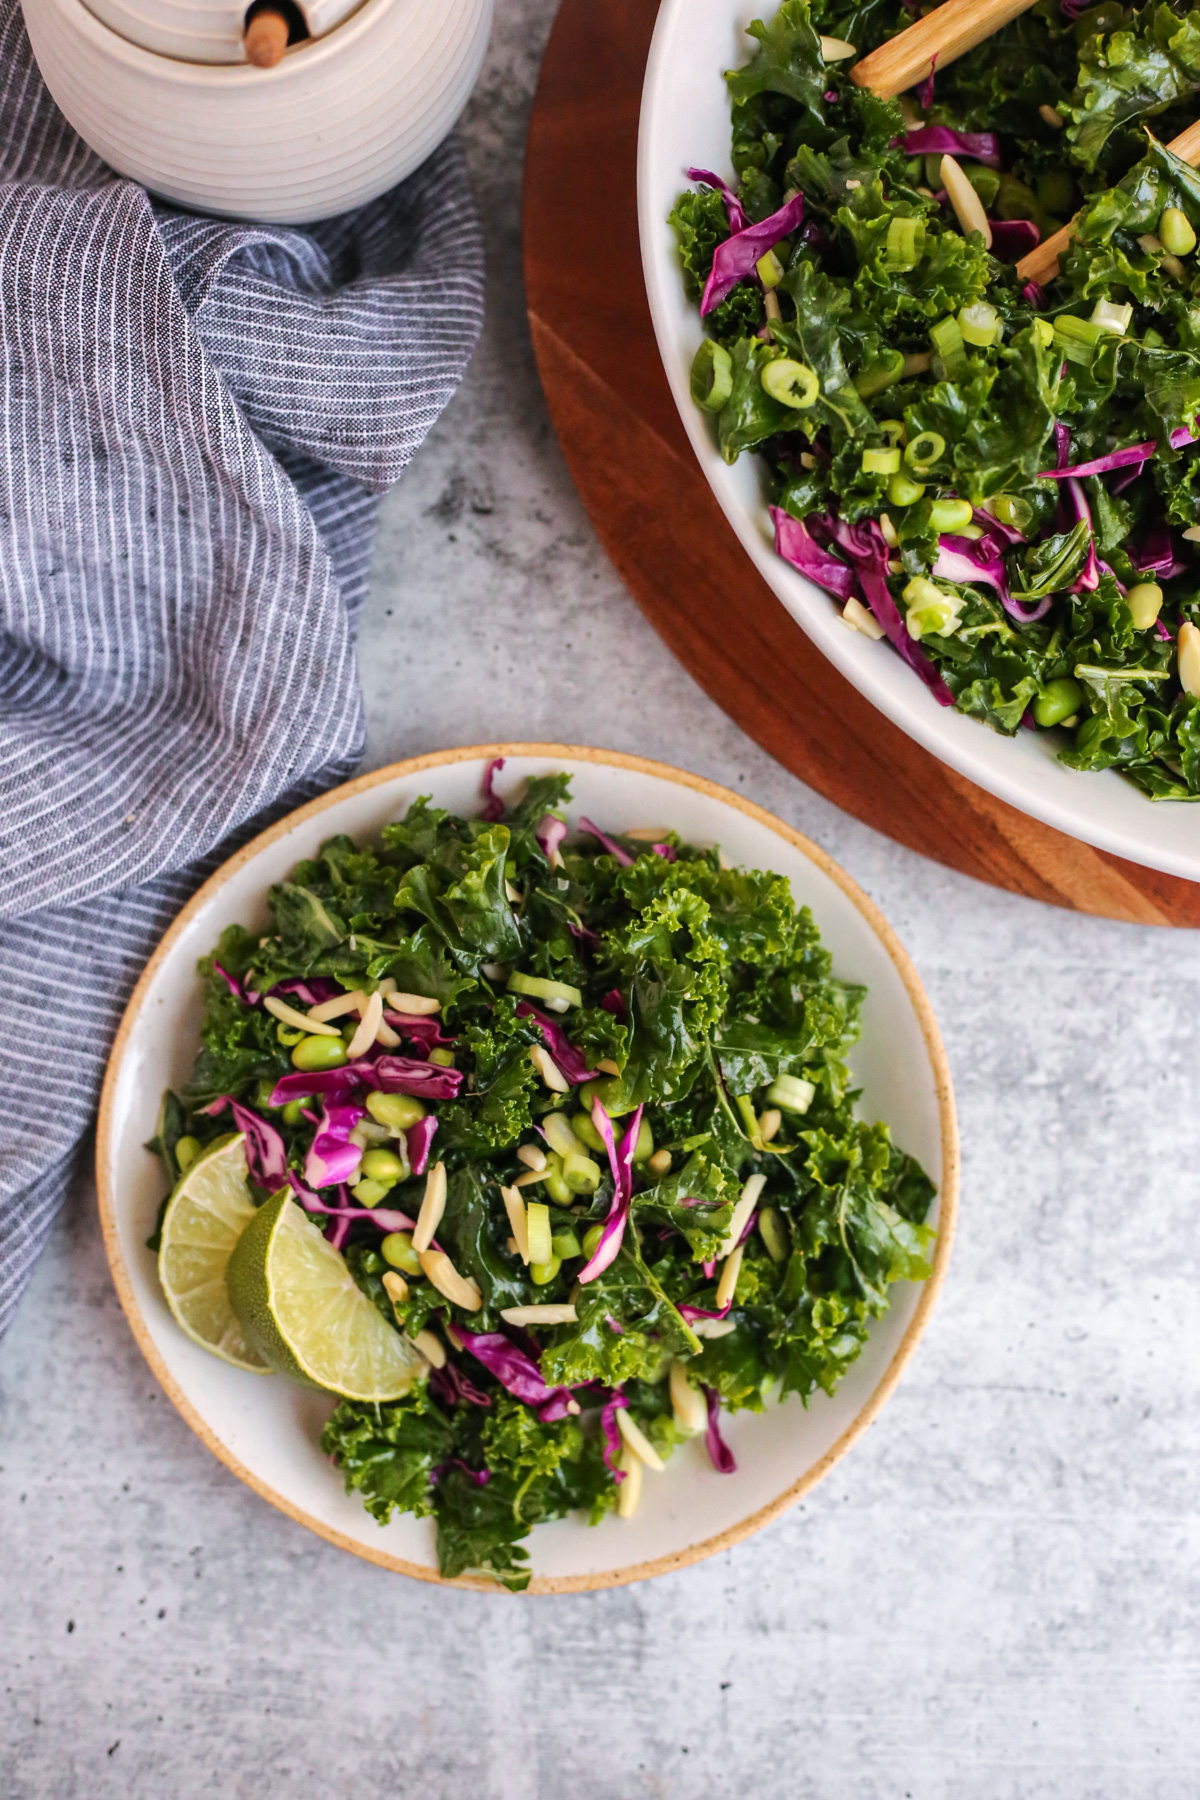 Overhead view on a kitchen countertop, showing a side salad served from a larger serving bowl. The salad is colorful with raw, massaged kale, lime wedges, red cabbage, edamame, slivered almonds, and sliced green onions. It's lightly dressed with a sesame-lime dressing and it looks fresh and appetizing